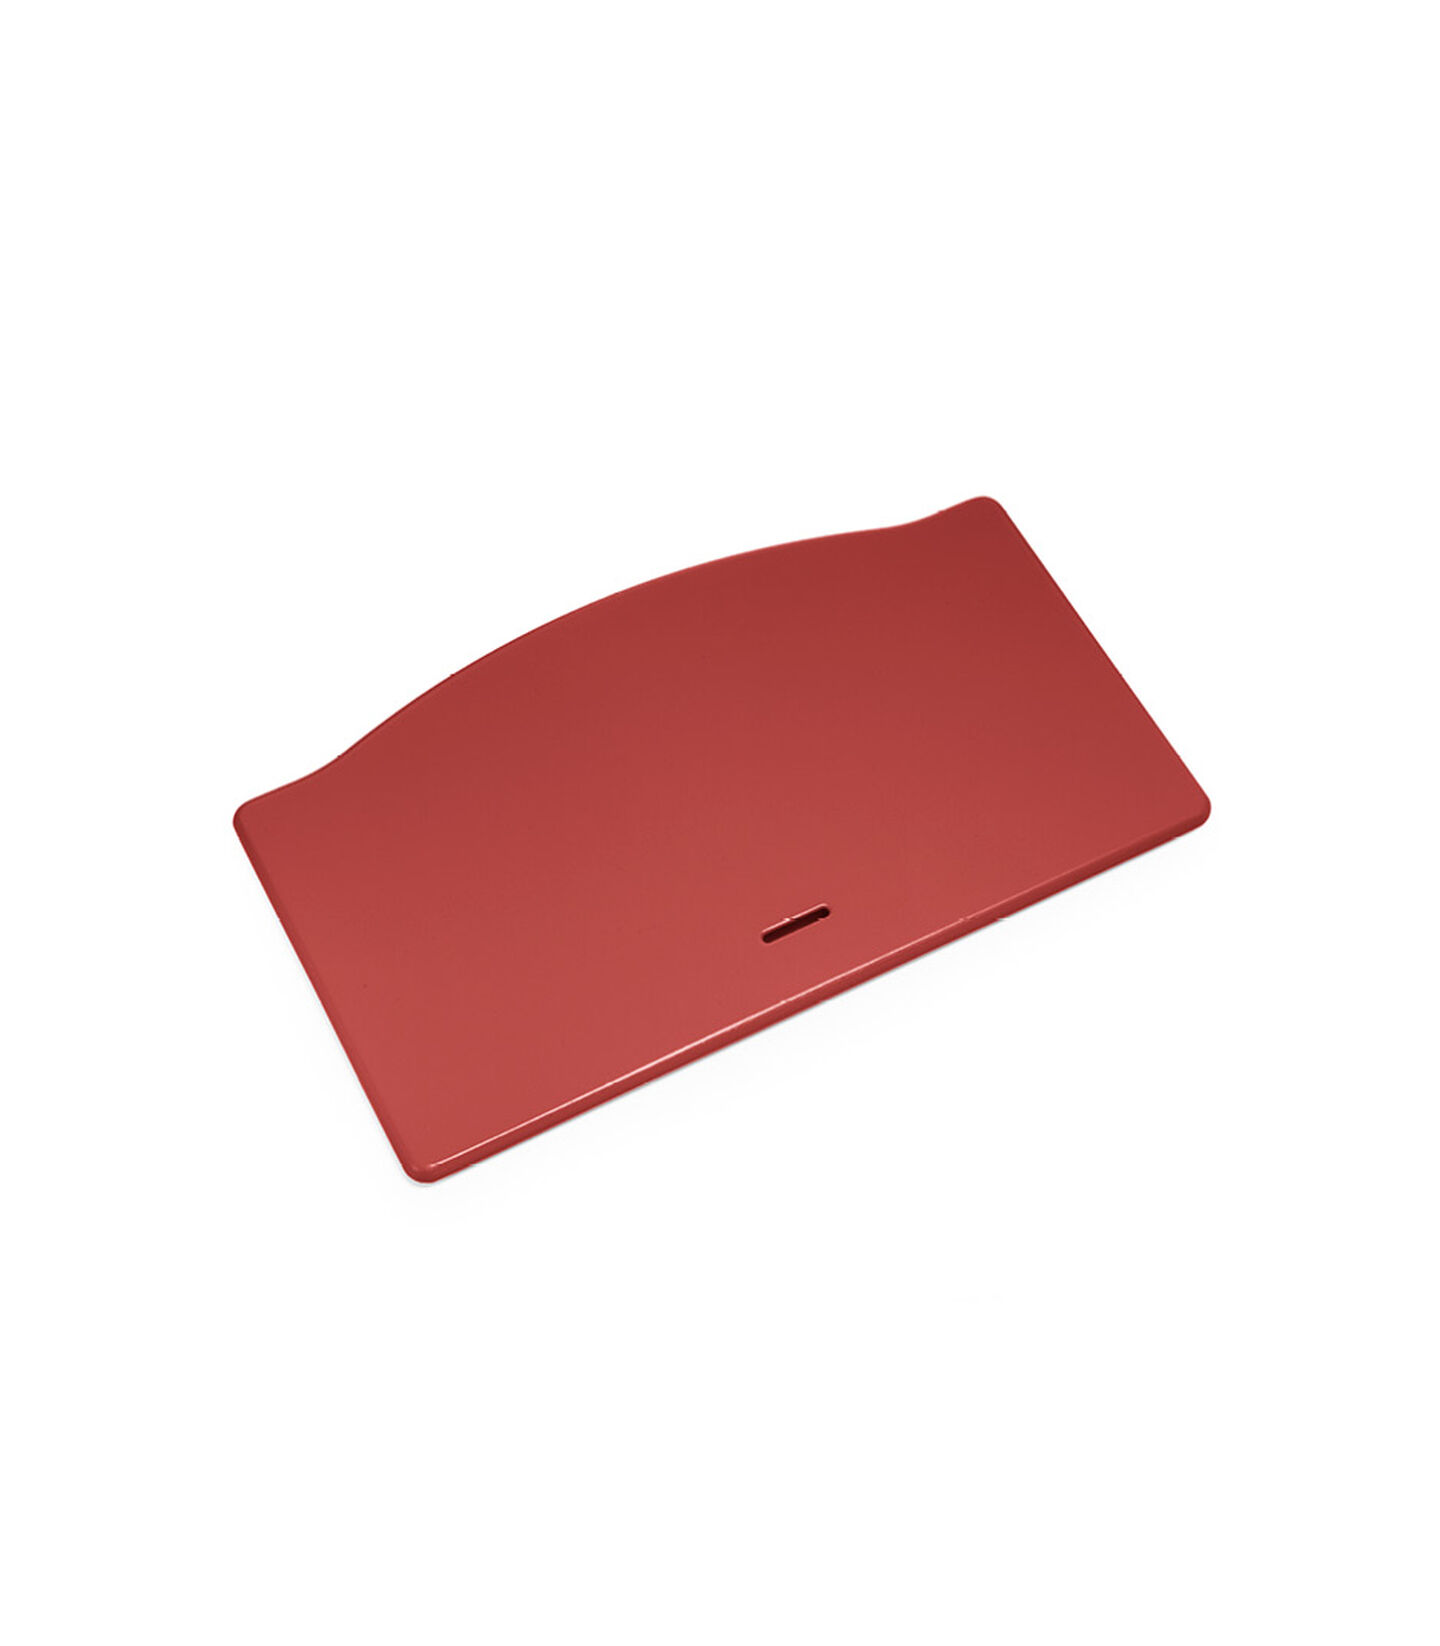 Tripp Trapp® sitteplate Warm Red, Warm Red, mainview view 1